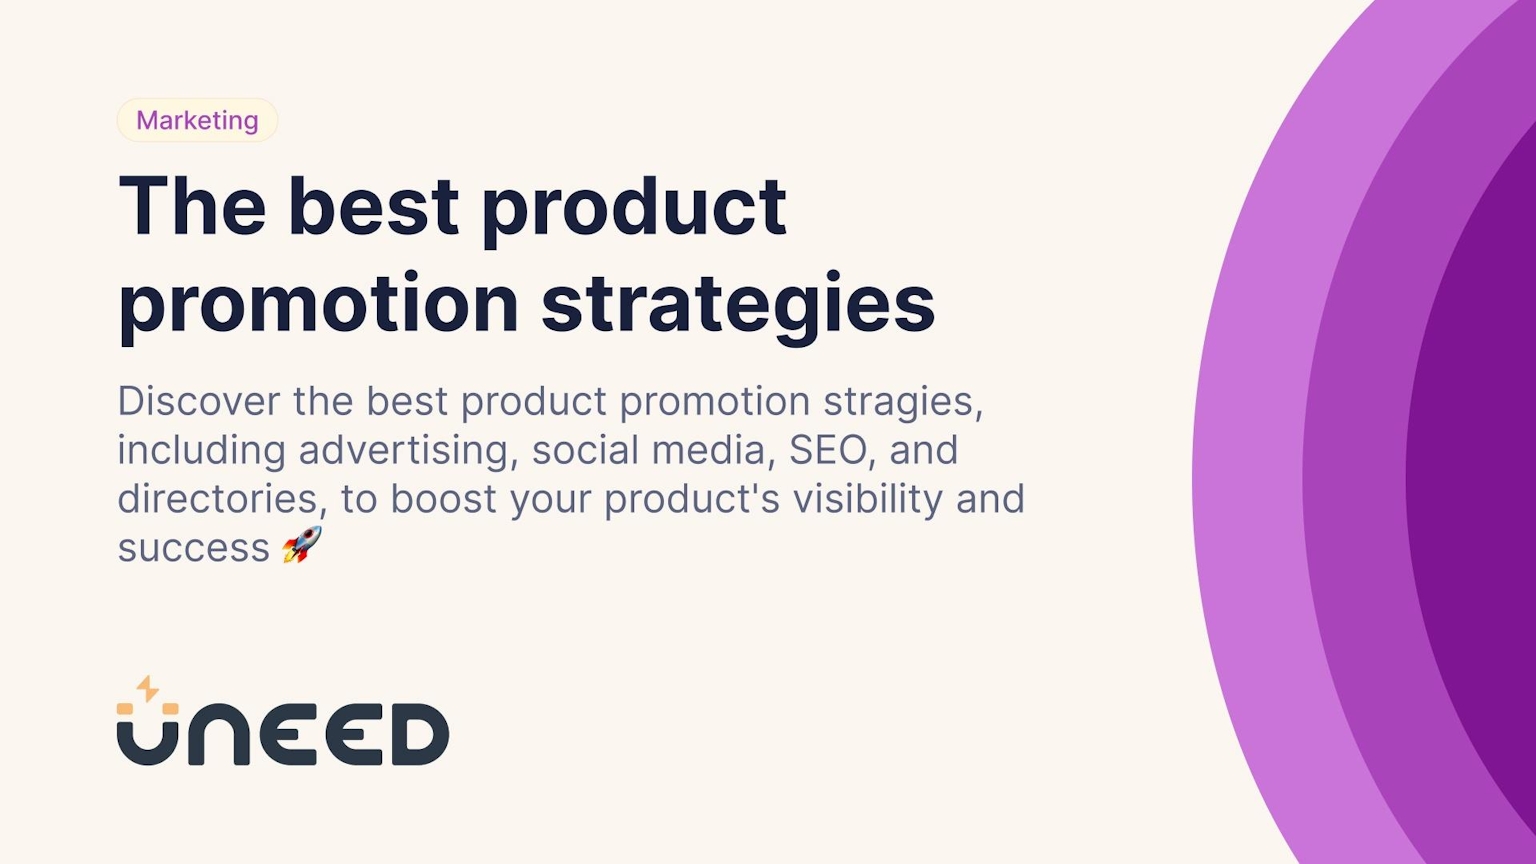 The best product promotion strategies